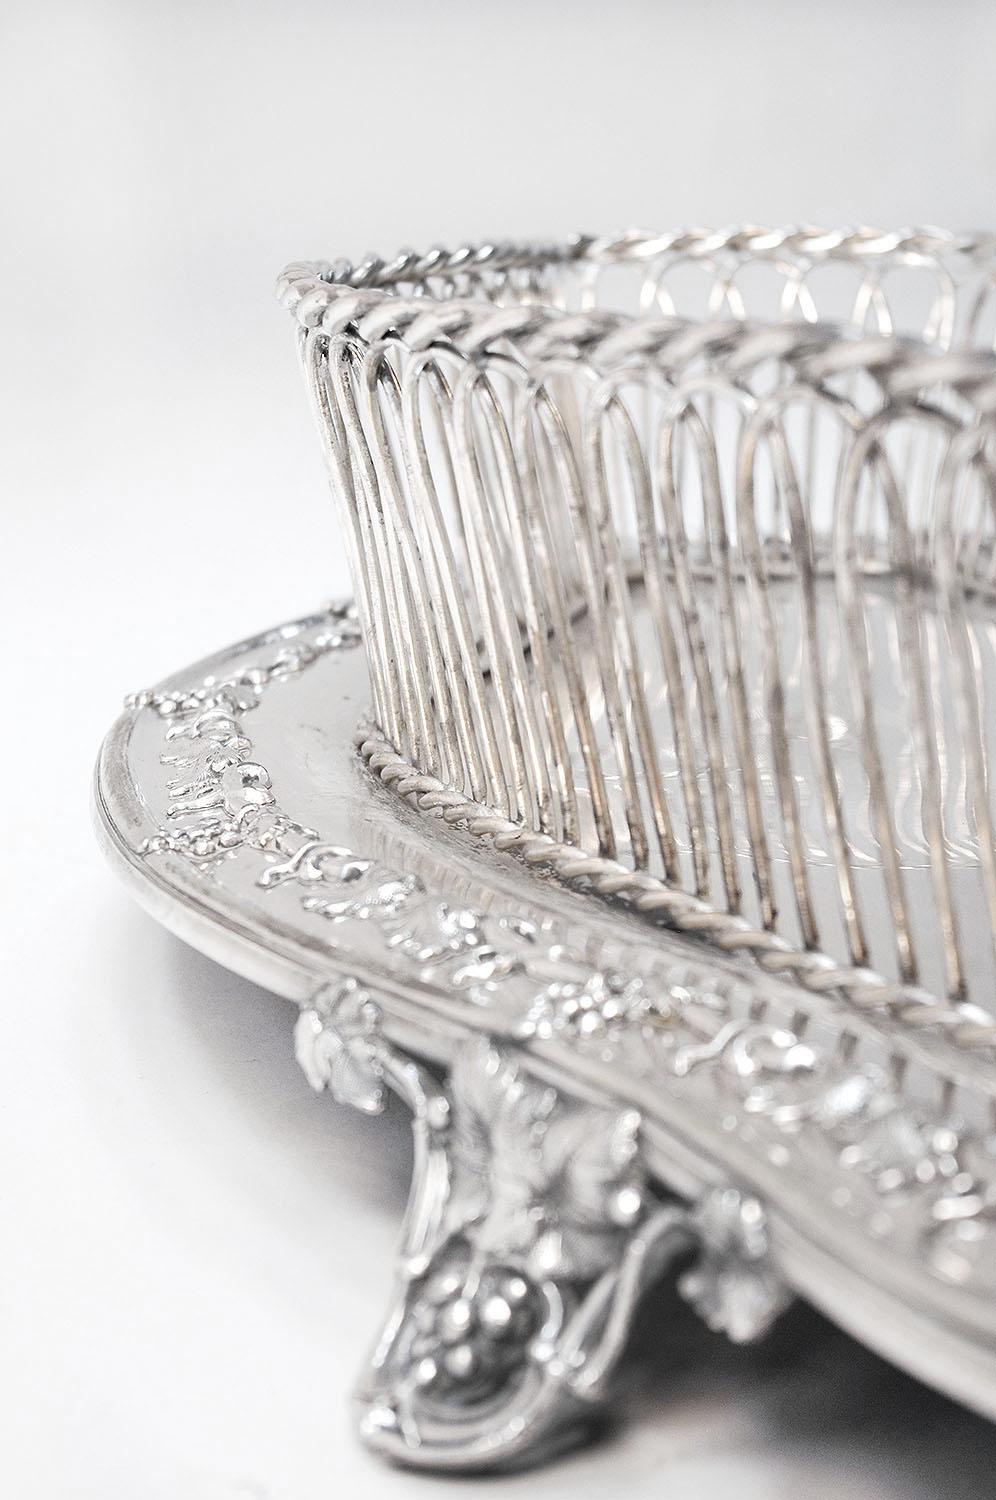 Silver plated metal centrepiece with a curve shaped plate adorned with a vine branches frieze on the edge, standing on four small curved legs with a similar decor. Plate topped by a sort of openwork wicker basket with arches shape edges braided up